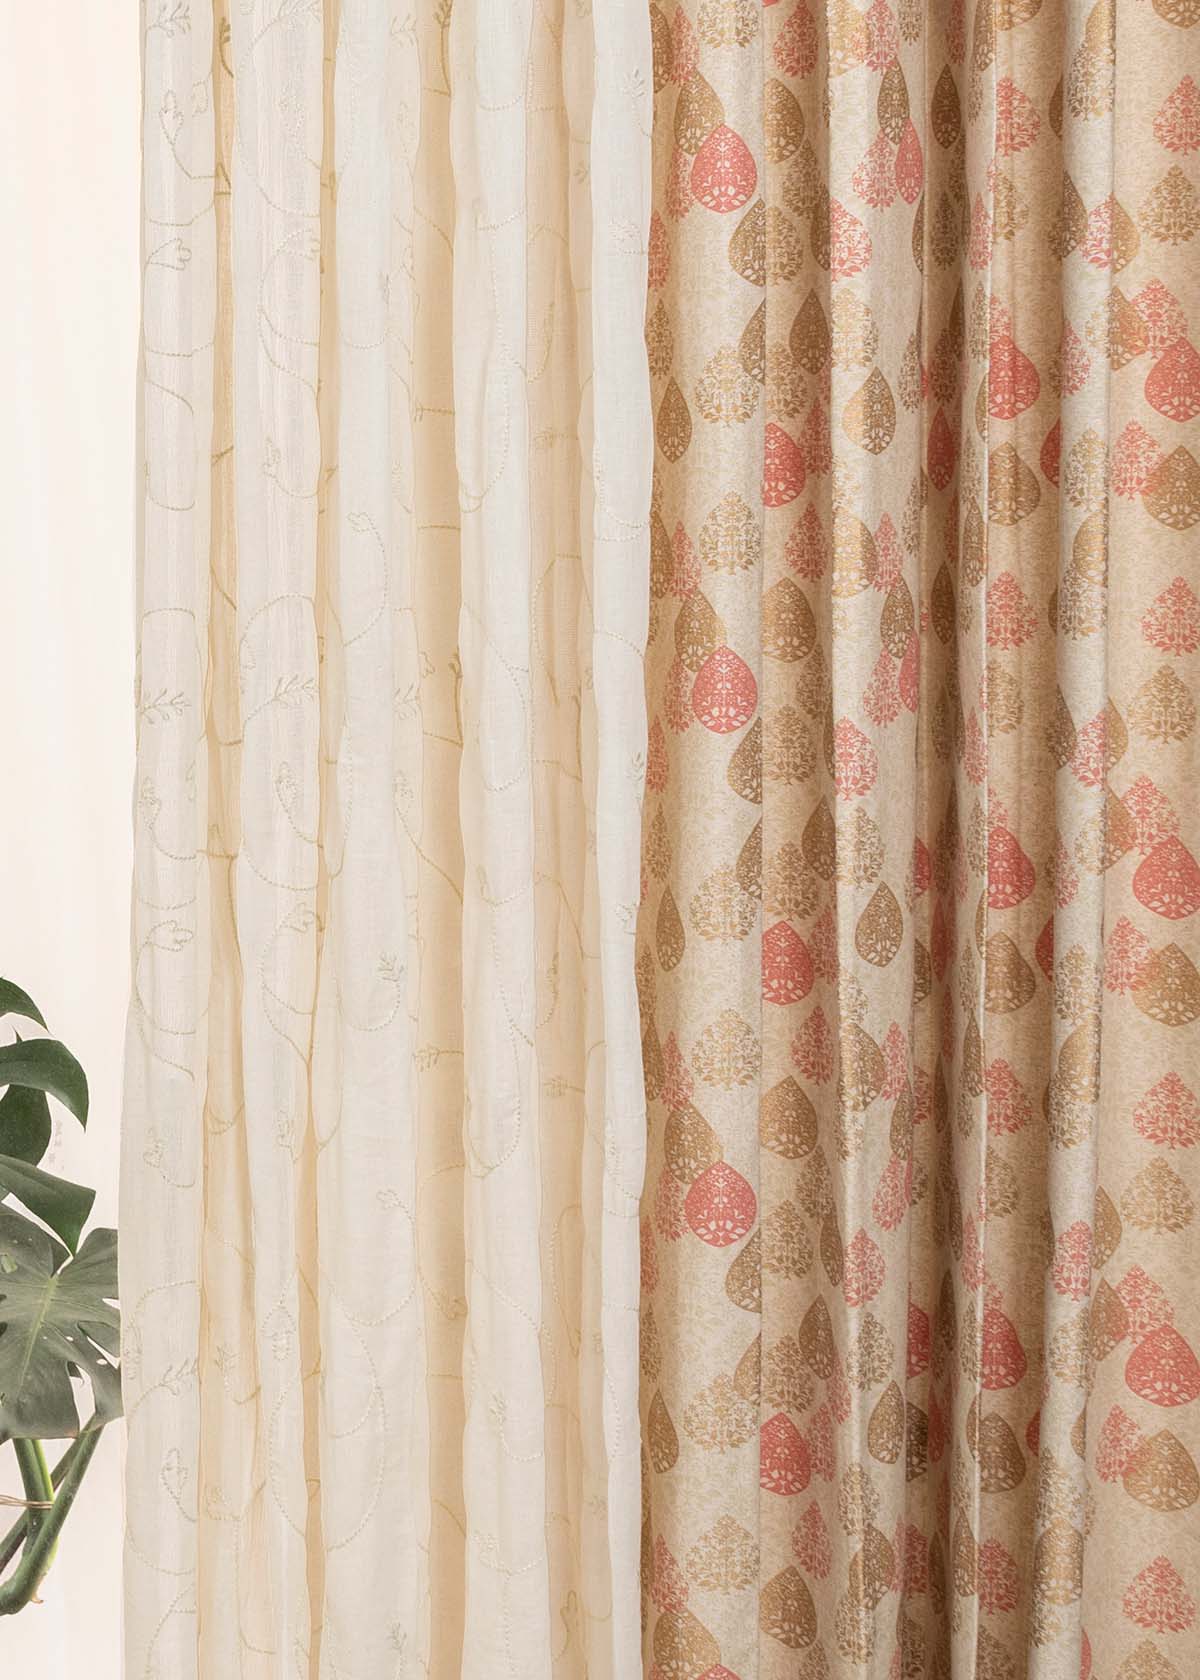 Indian Shimmer, Ivy Vines Cream Sheer Set of 4 Combo Cotton Curtain - Multicolor